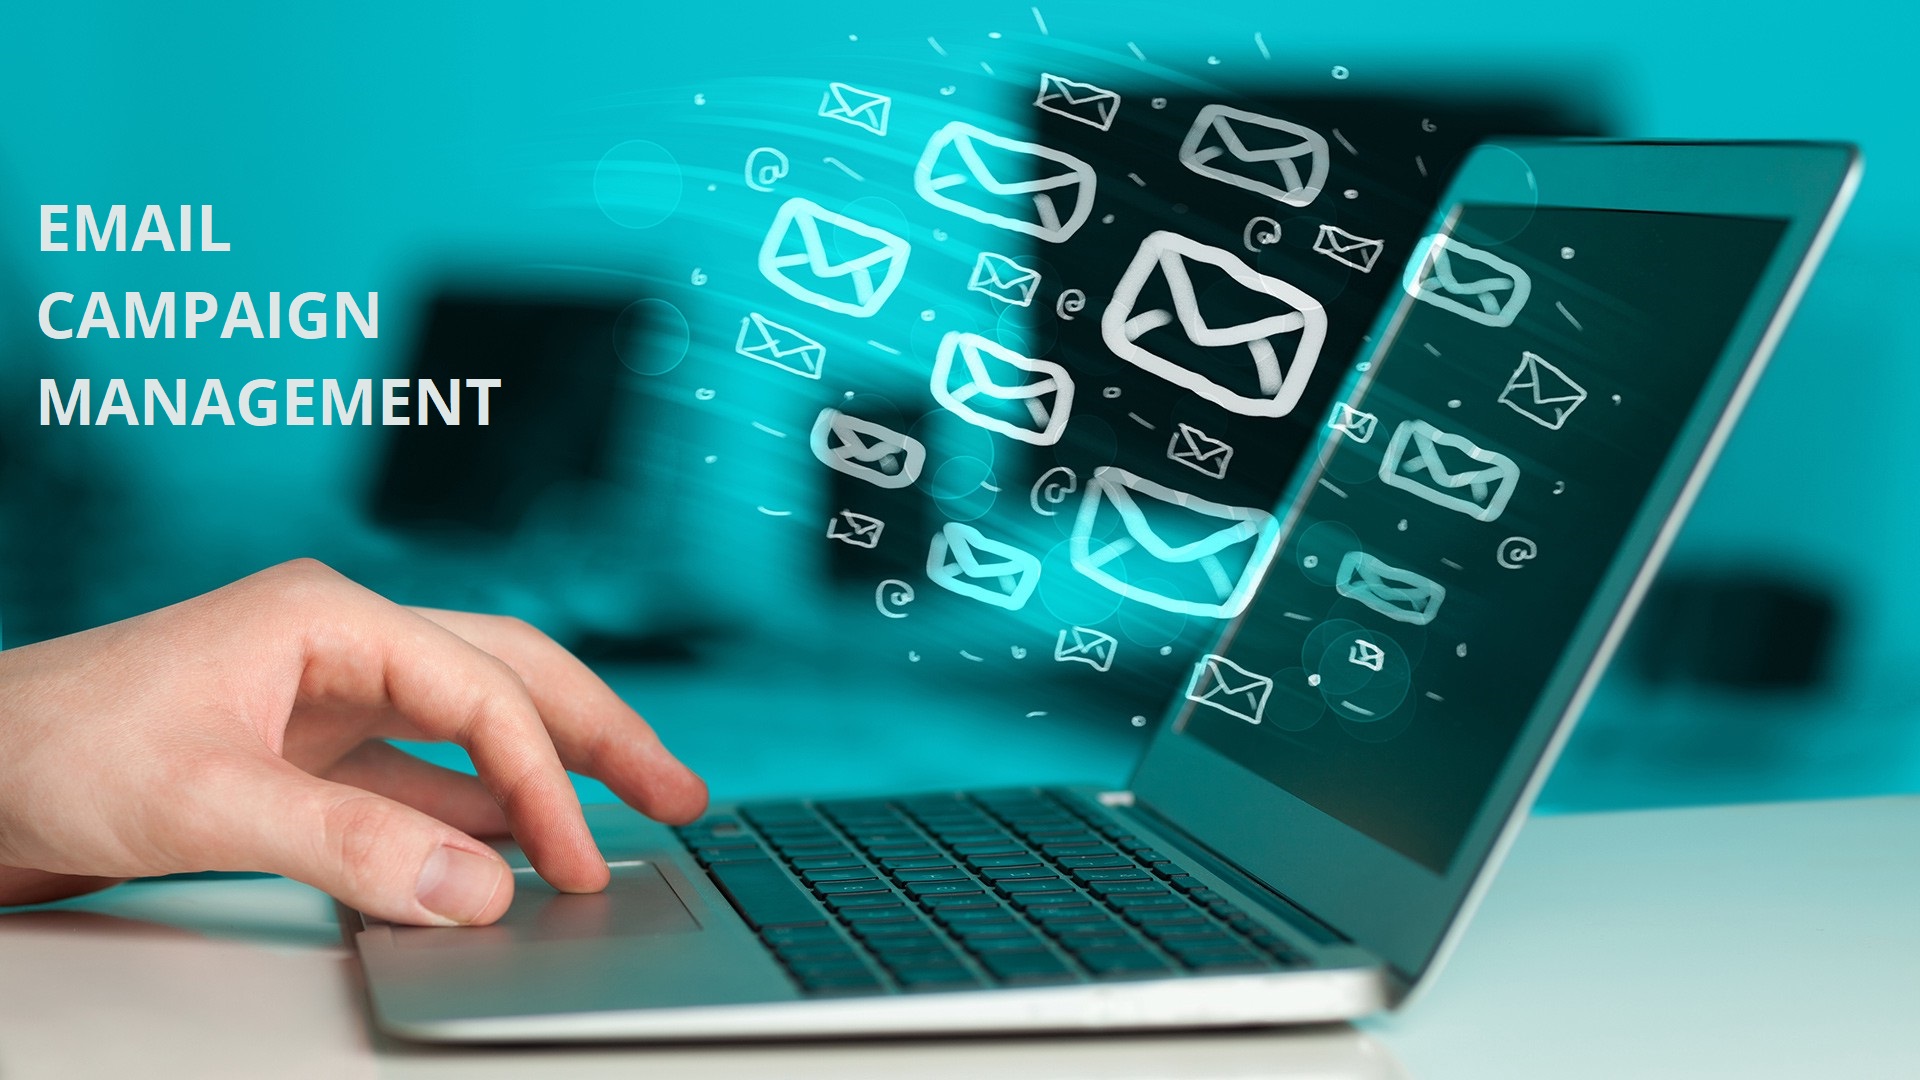 3 Crucial Tips for Successful Email Campaign Management